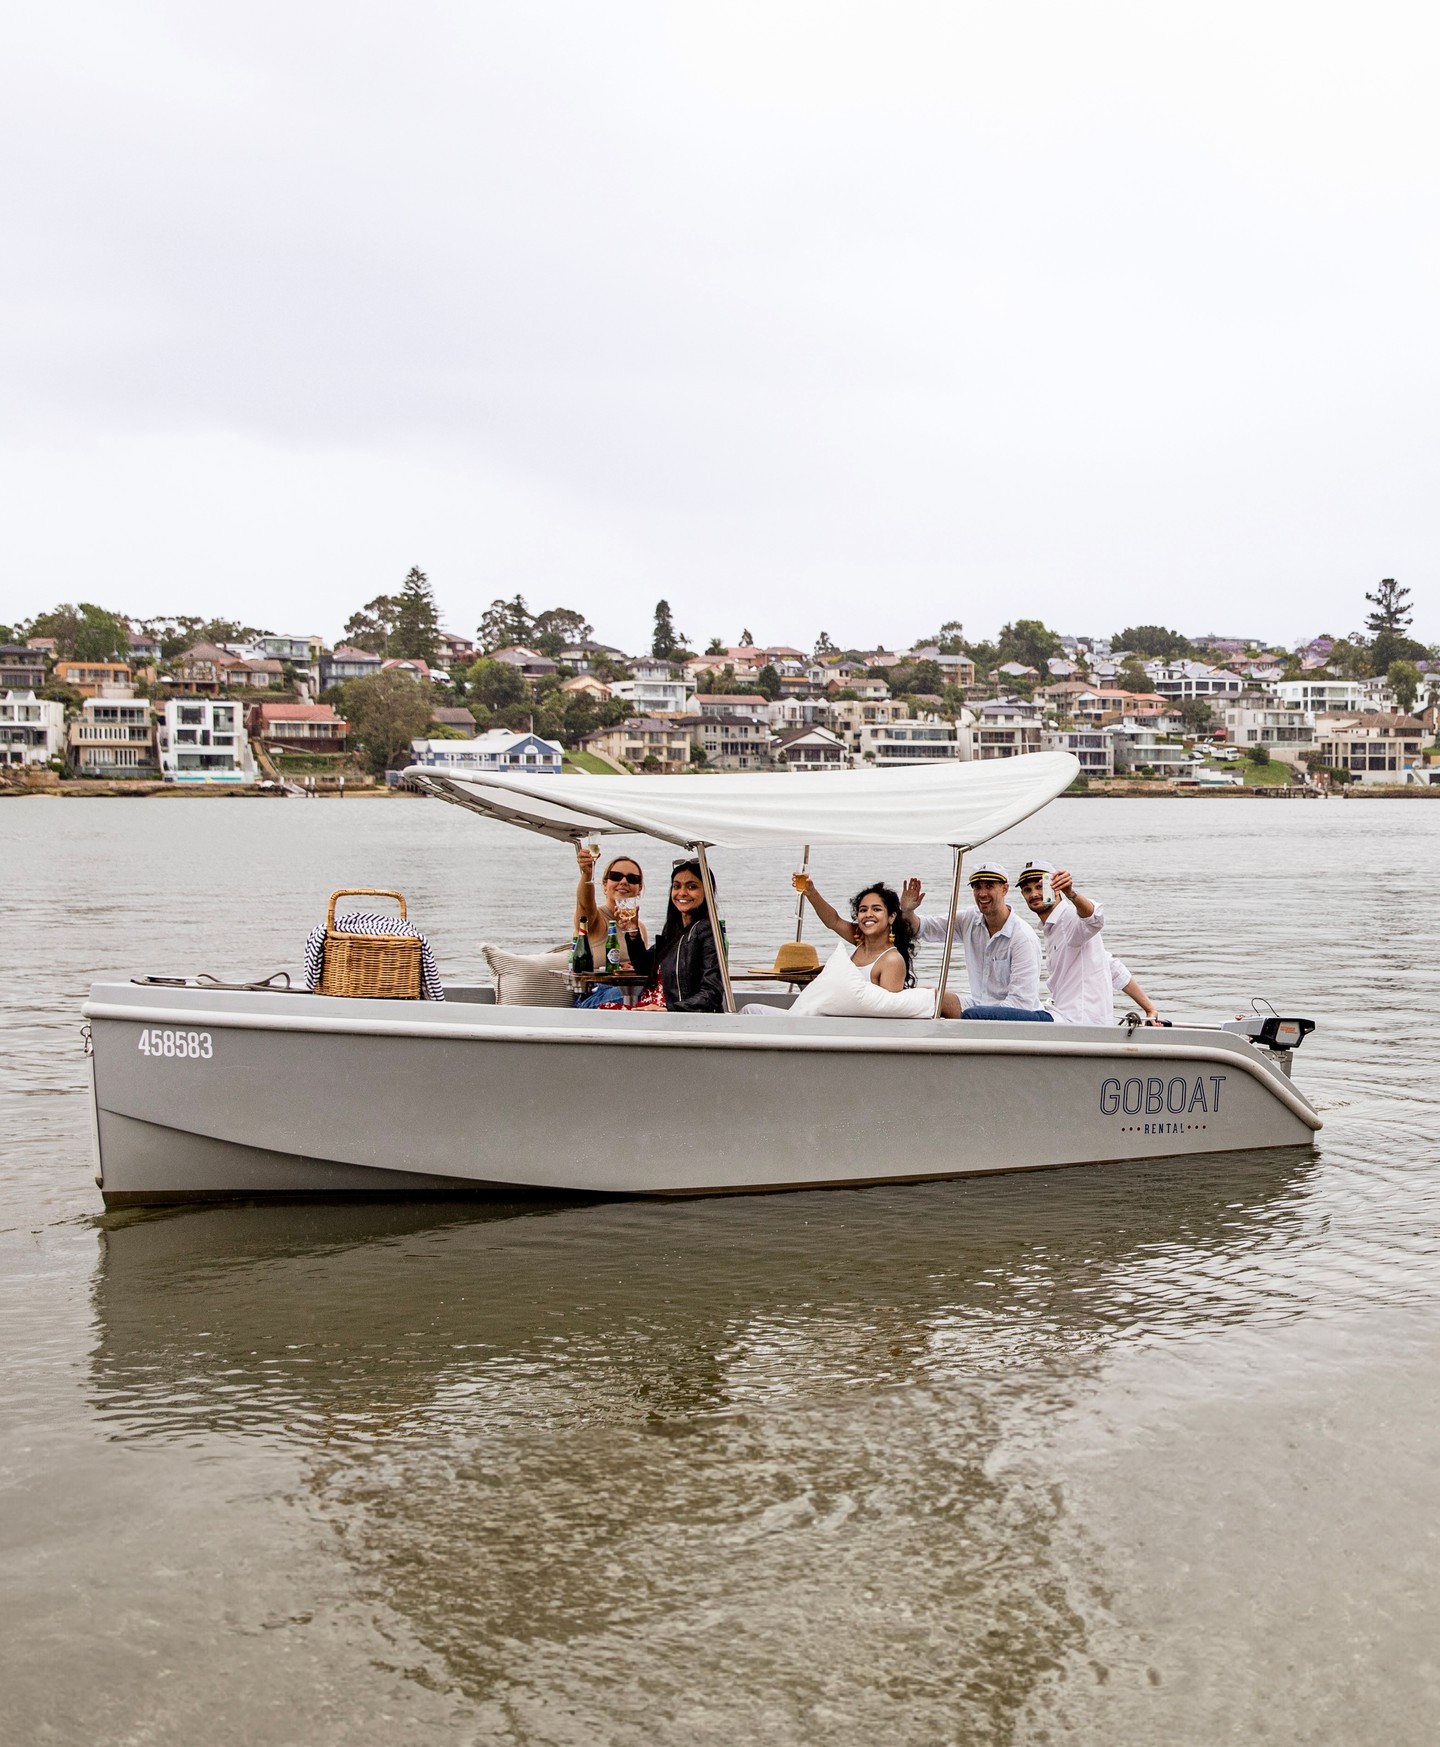 GoBoat Canberra - 1 Hour Private Electric Boat Hire - Epic deals